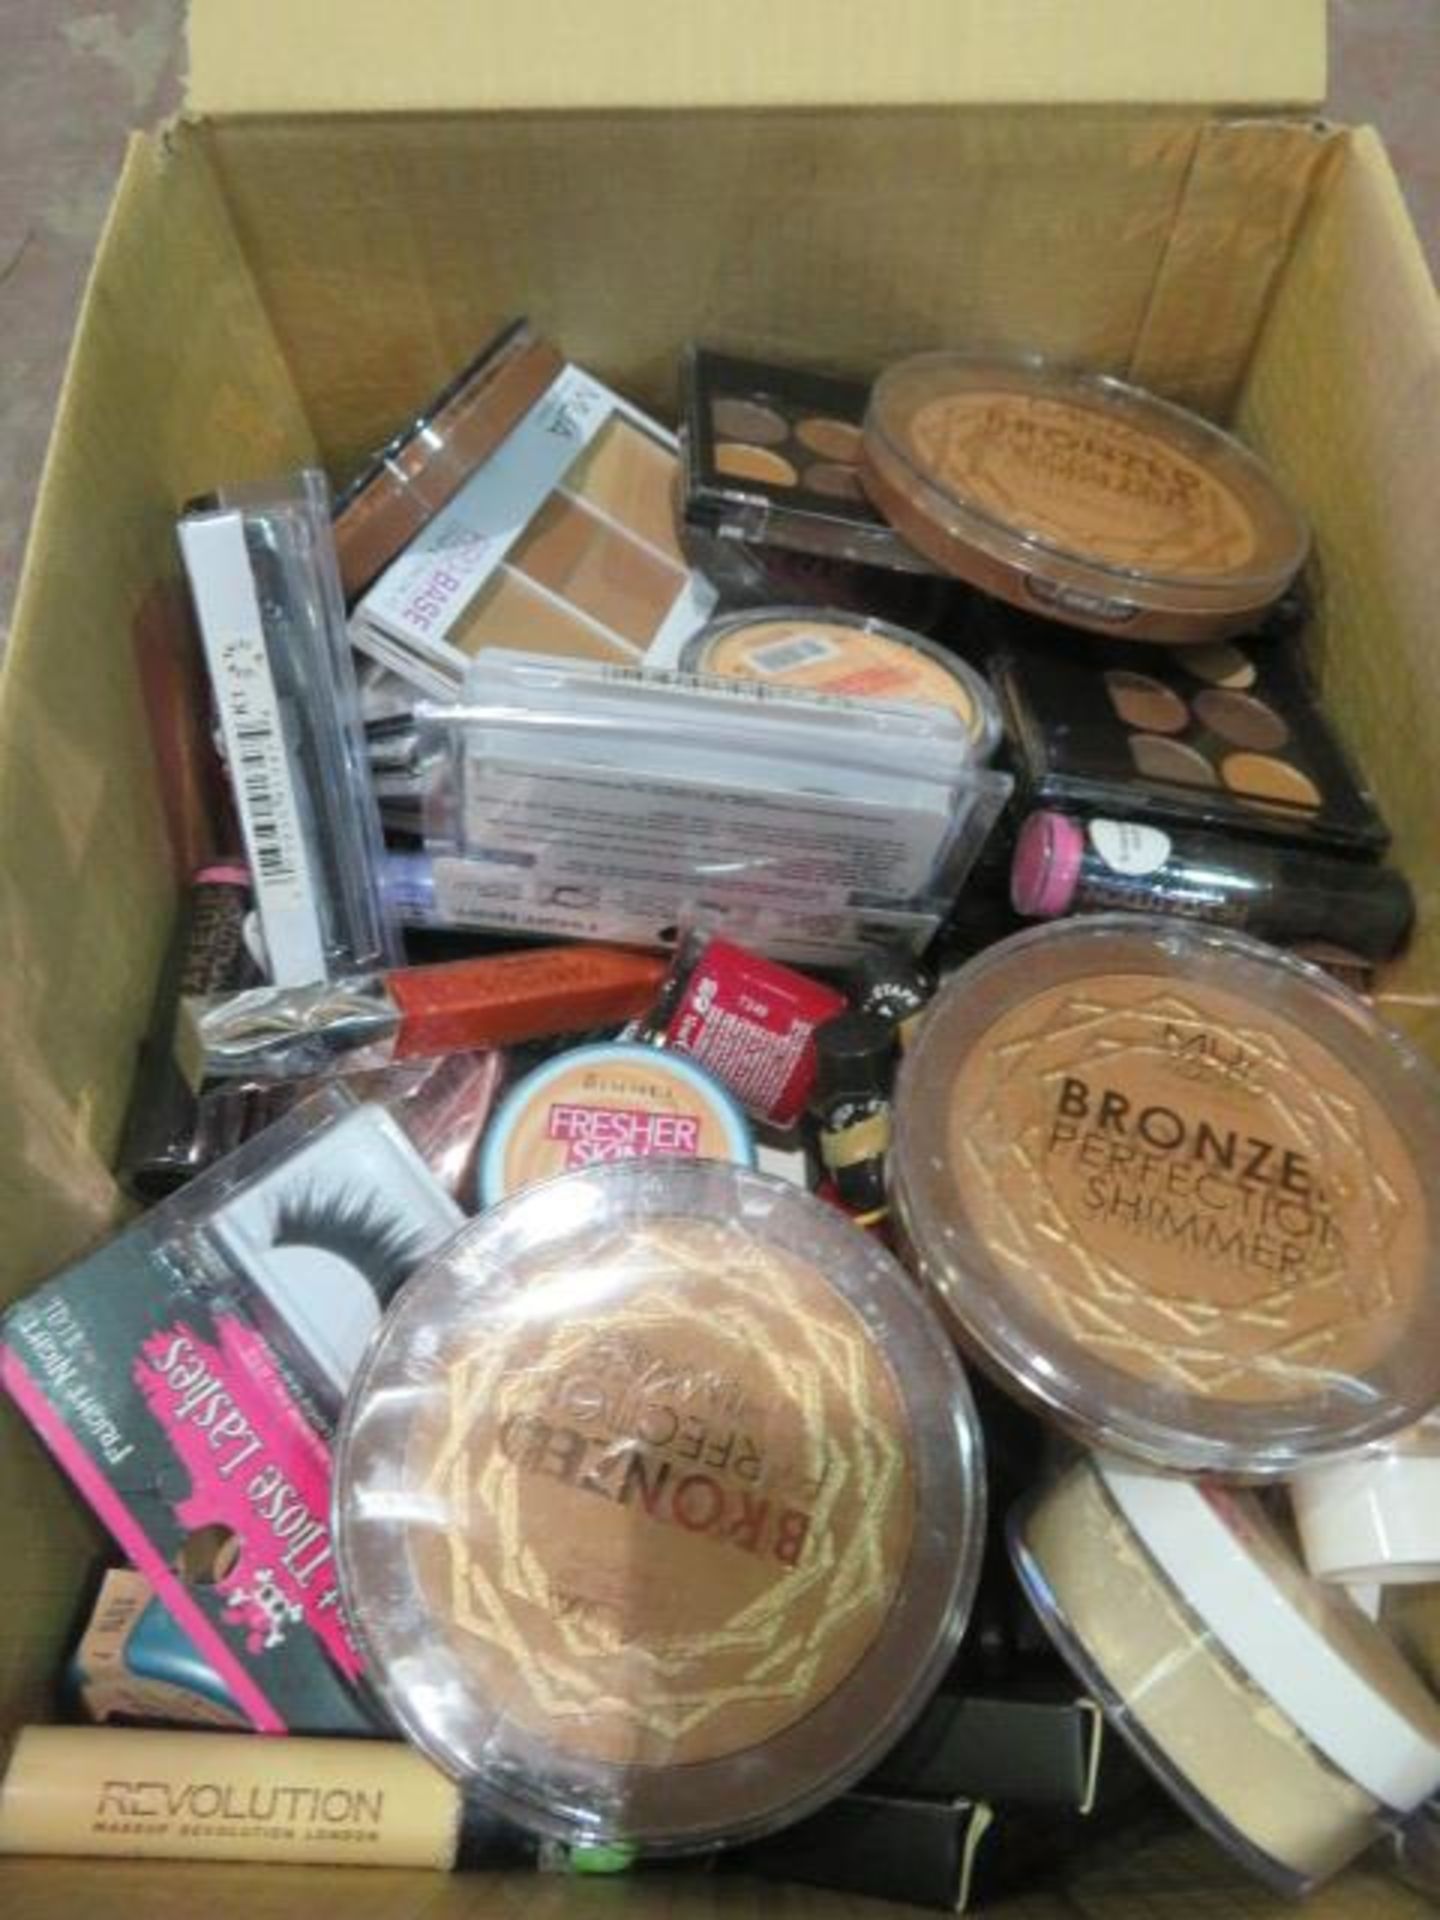 (Z177) Circa. 200 items of various new make up acadamy make up to include: rimmel fresher skin,...